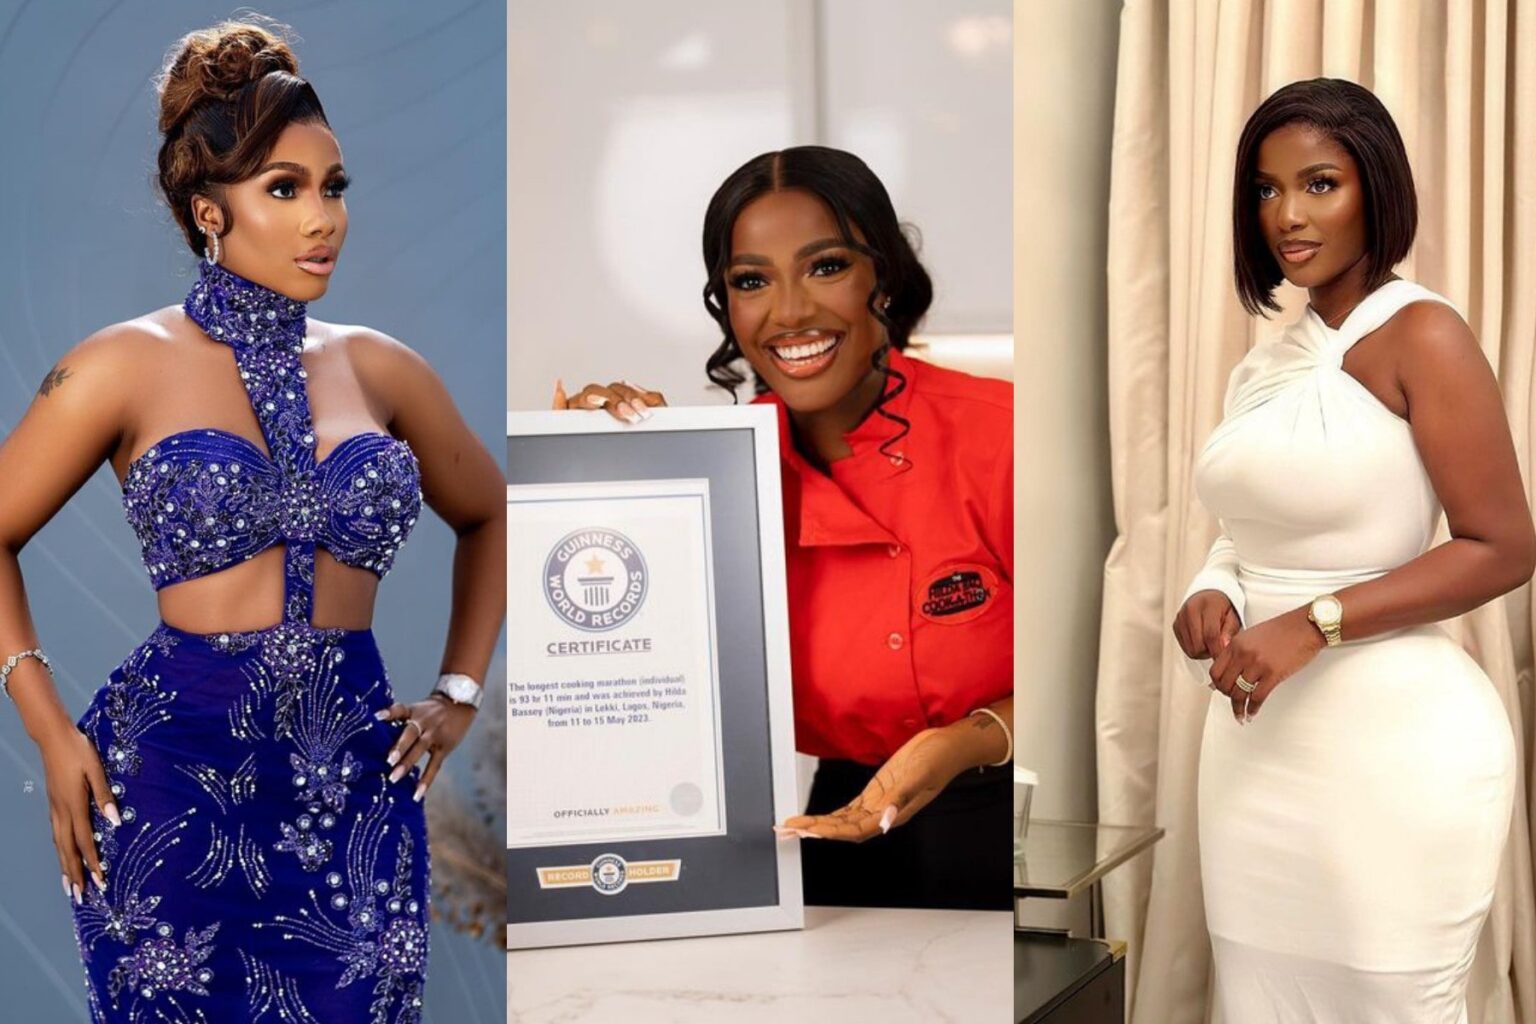 She-is-done-and-dusted-Mercy-Eke-replies-Guinness-World-Record-over-their-message-to-Hilda-Baci-Kemi-Filani-blog-min-1536x1024-1.jpg